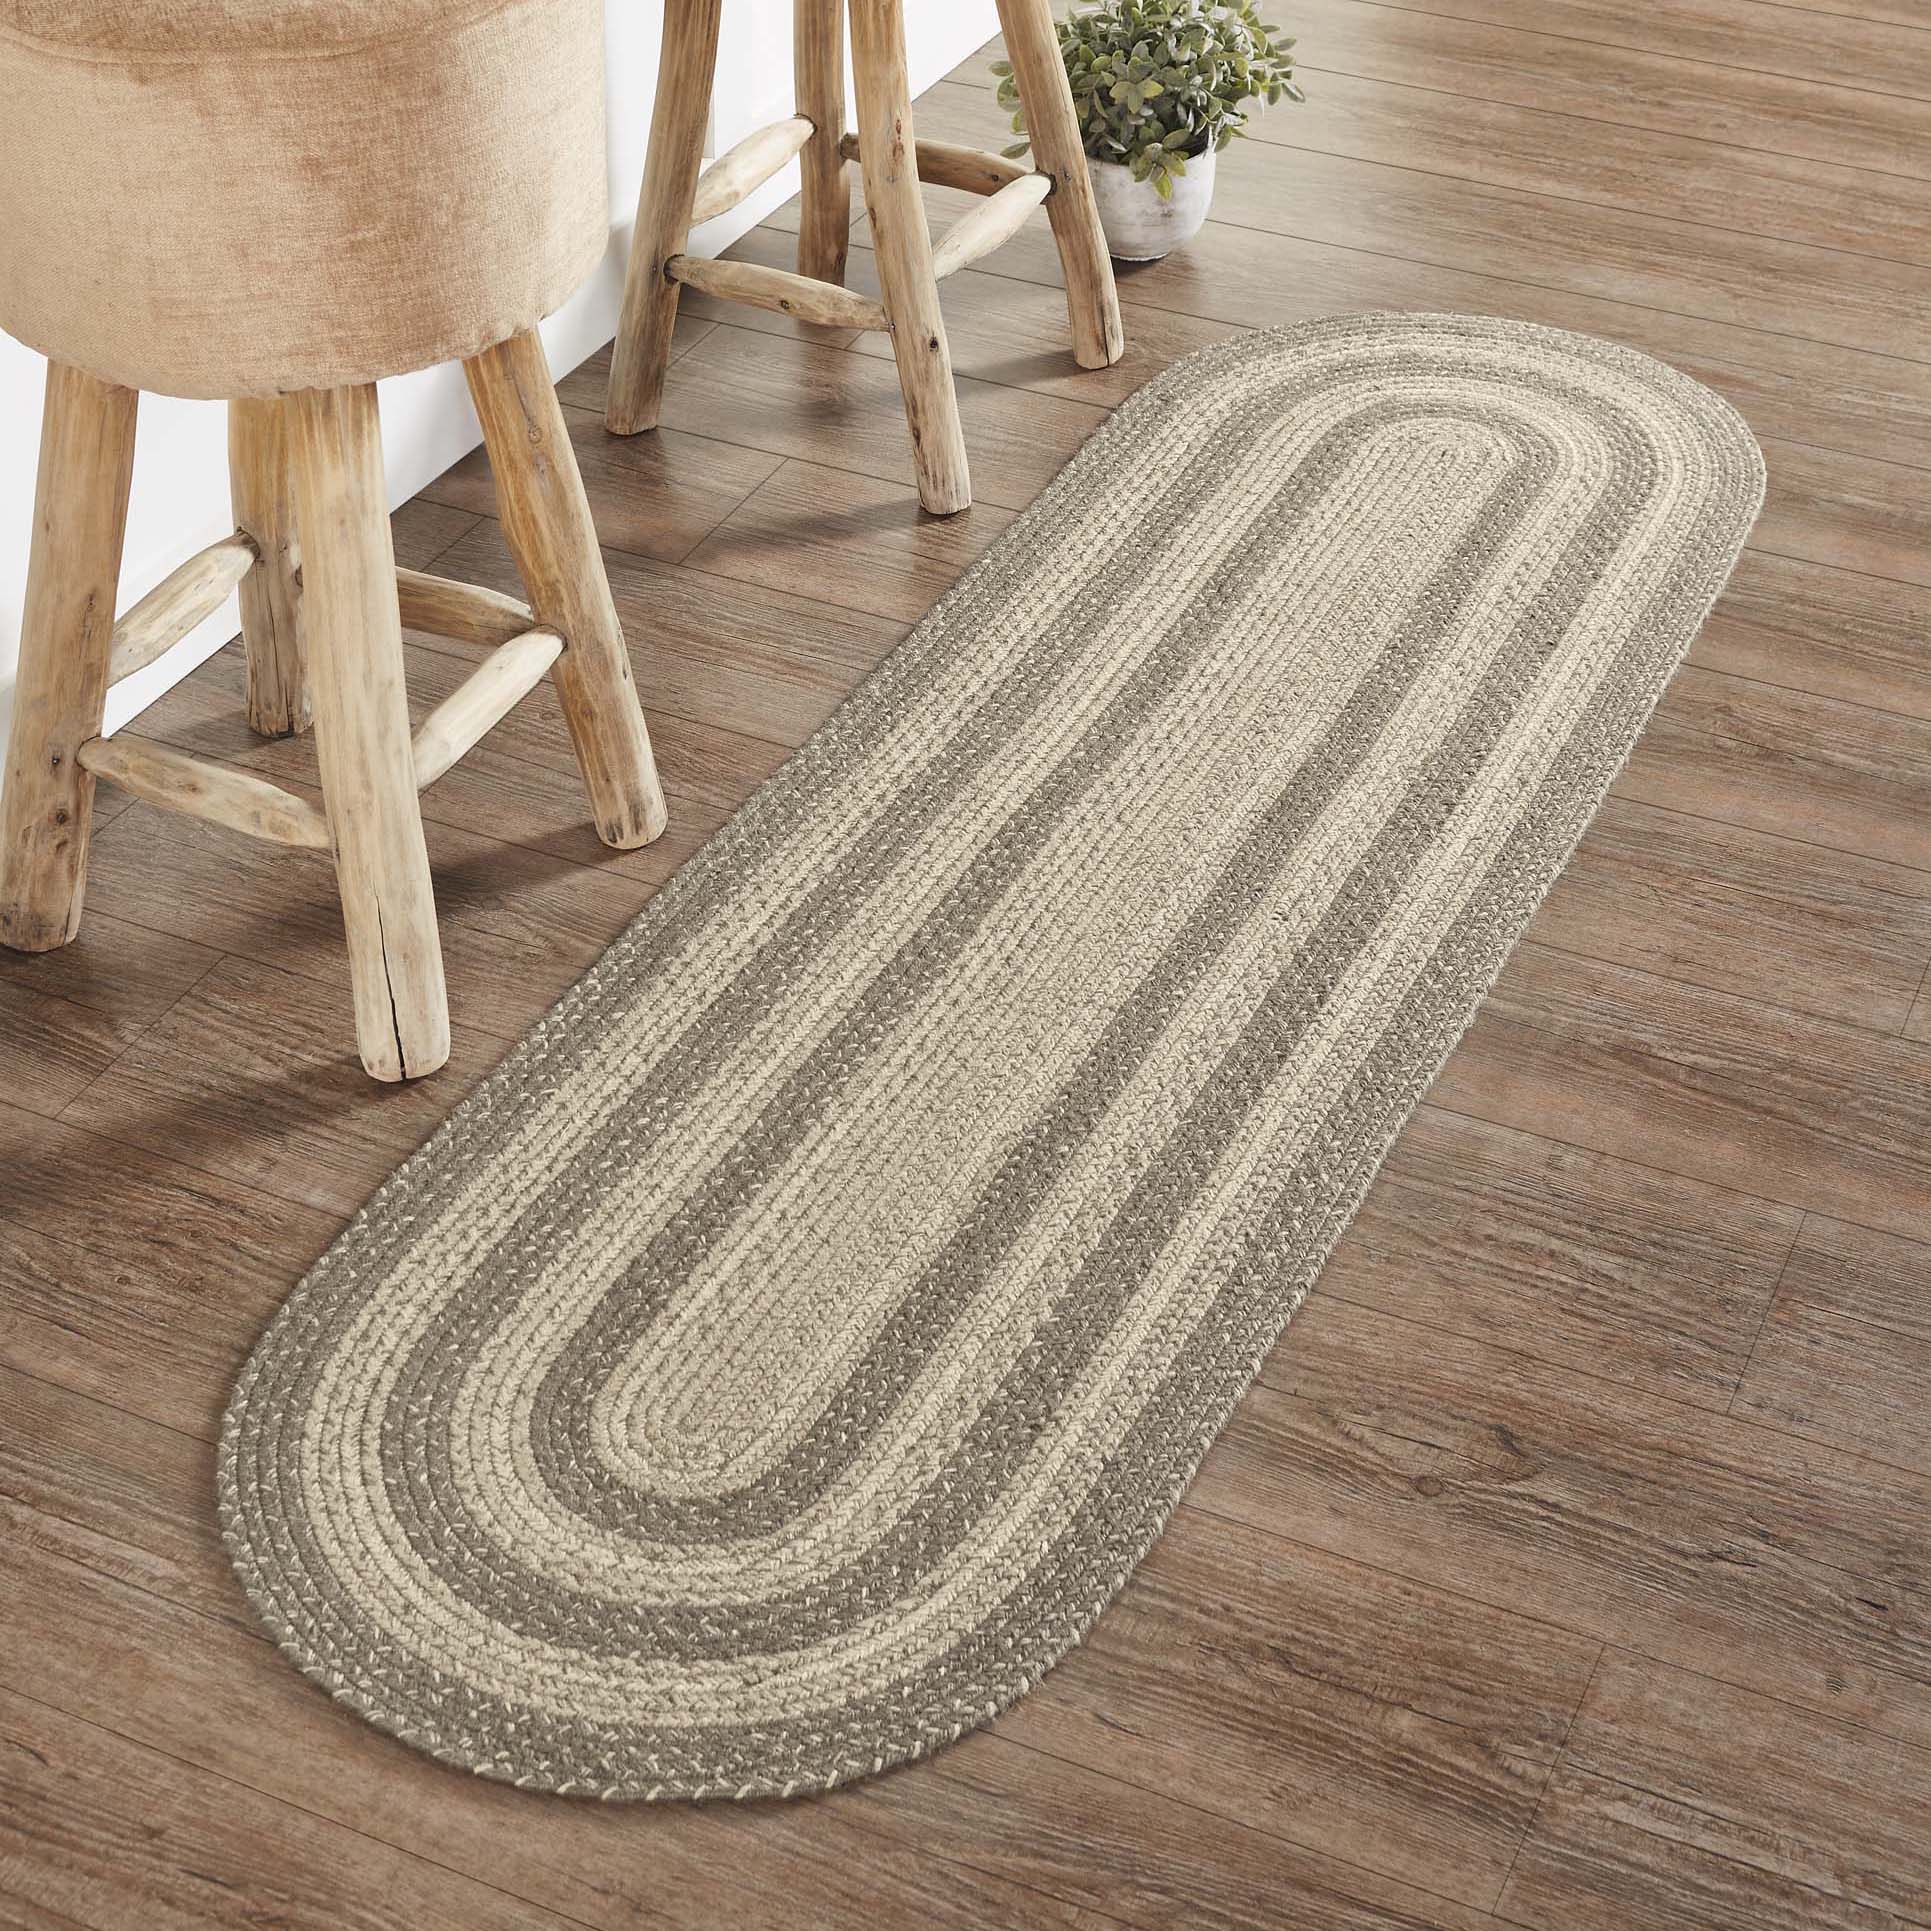 Cobblestone Jute Braided Rug/Runner Oval with Rug Pad 22"x72" VHC Brands